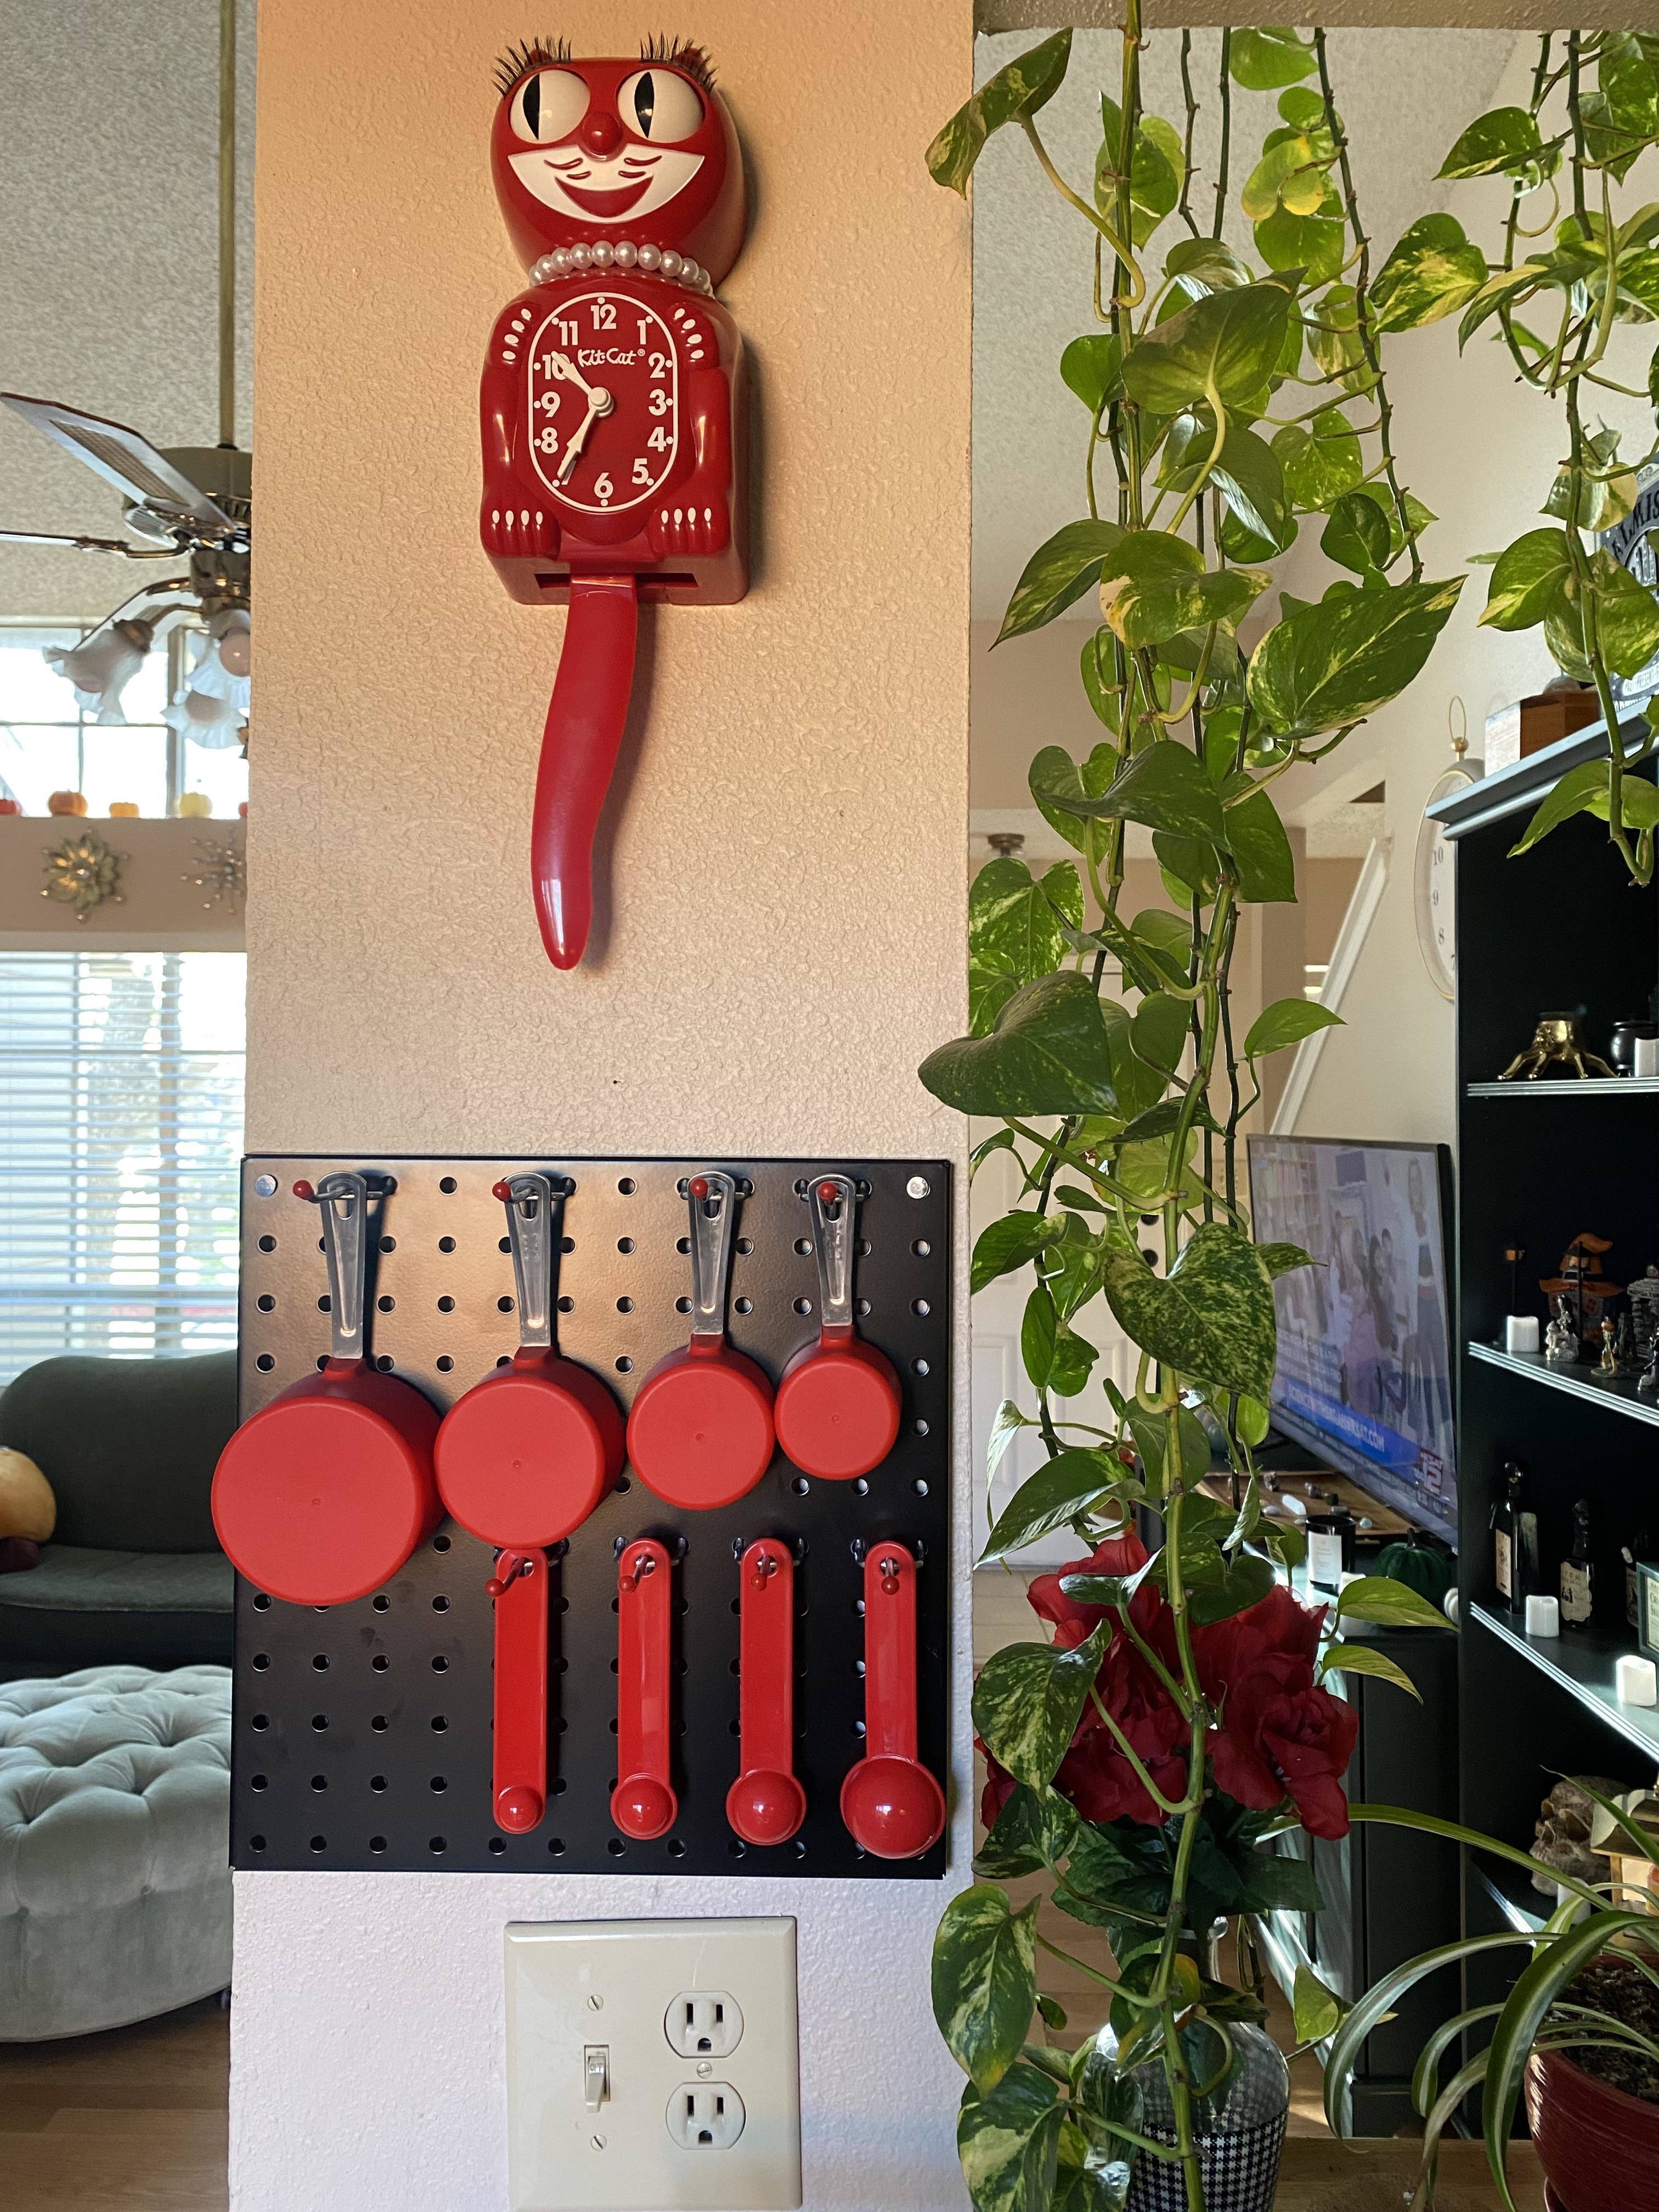 Mini pegboard on a kitchen wall holding four measuring cups and four measuring spoons